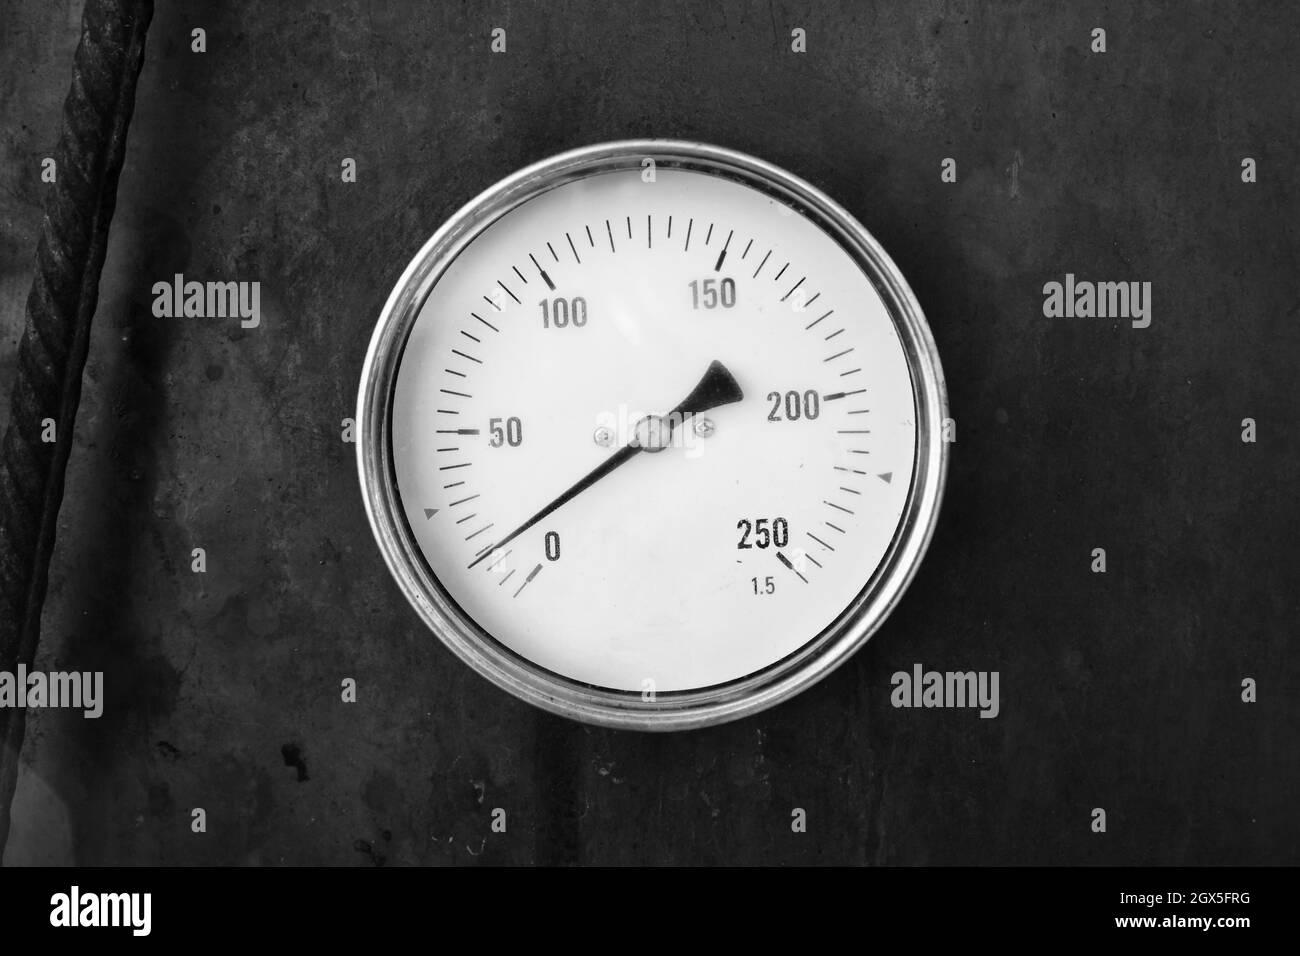 Axial thermometer mounted in rusty steel stove, close up vintage stylized black and white photo Stock Photo